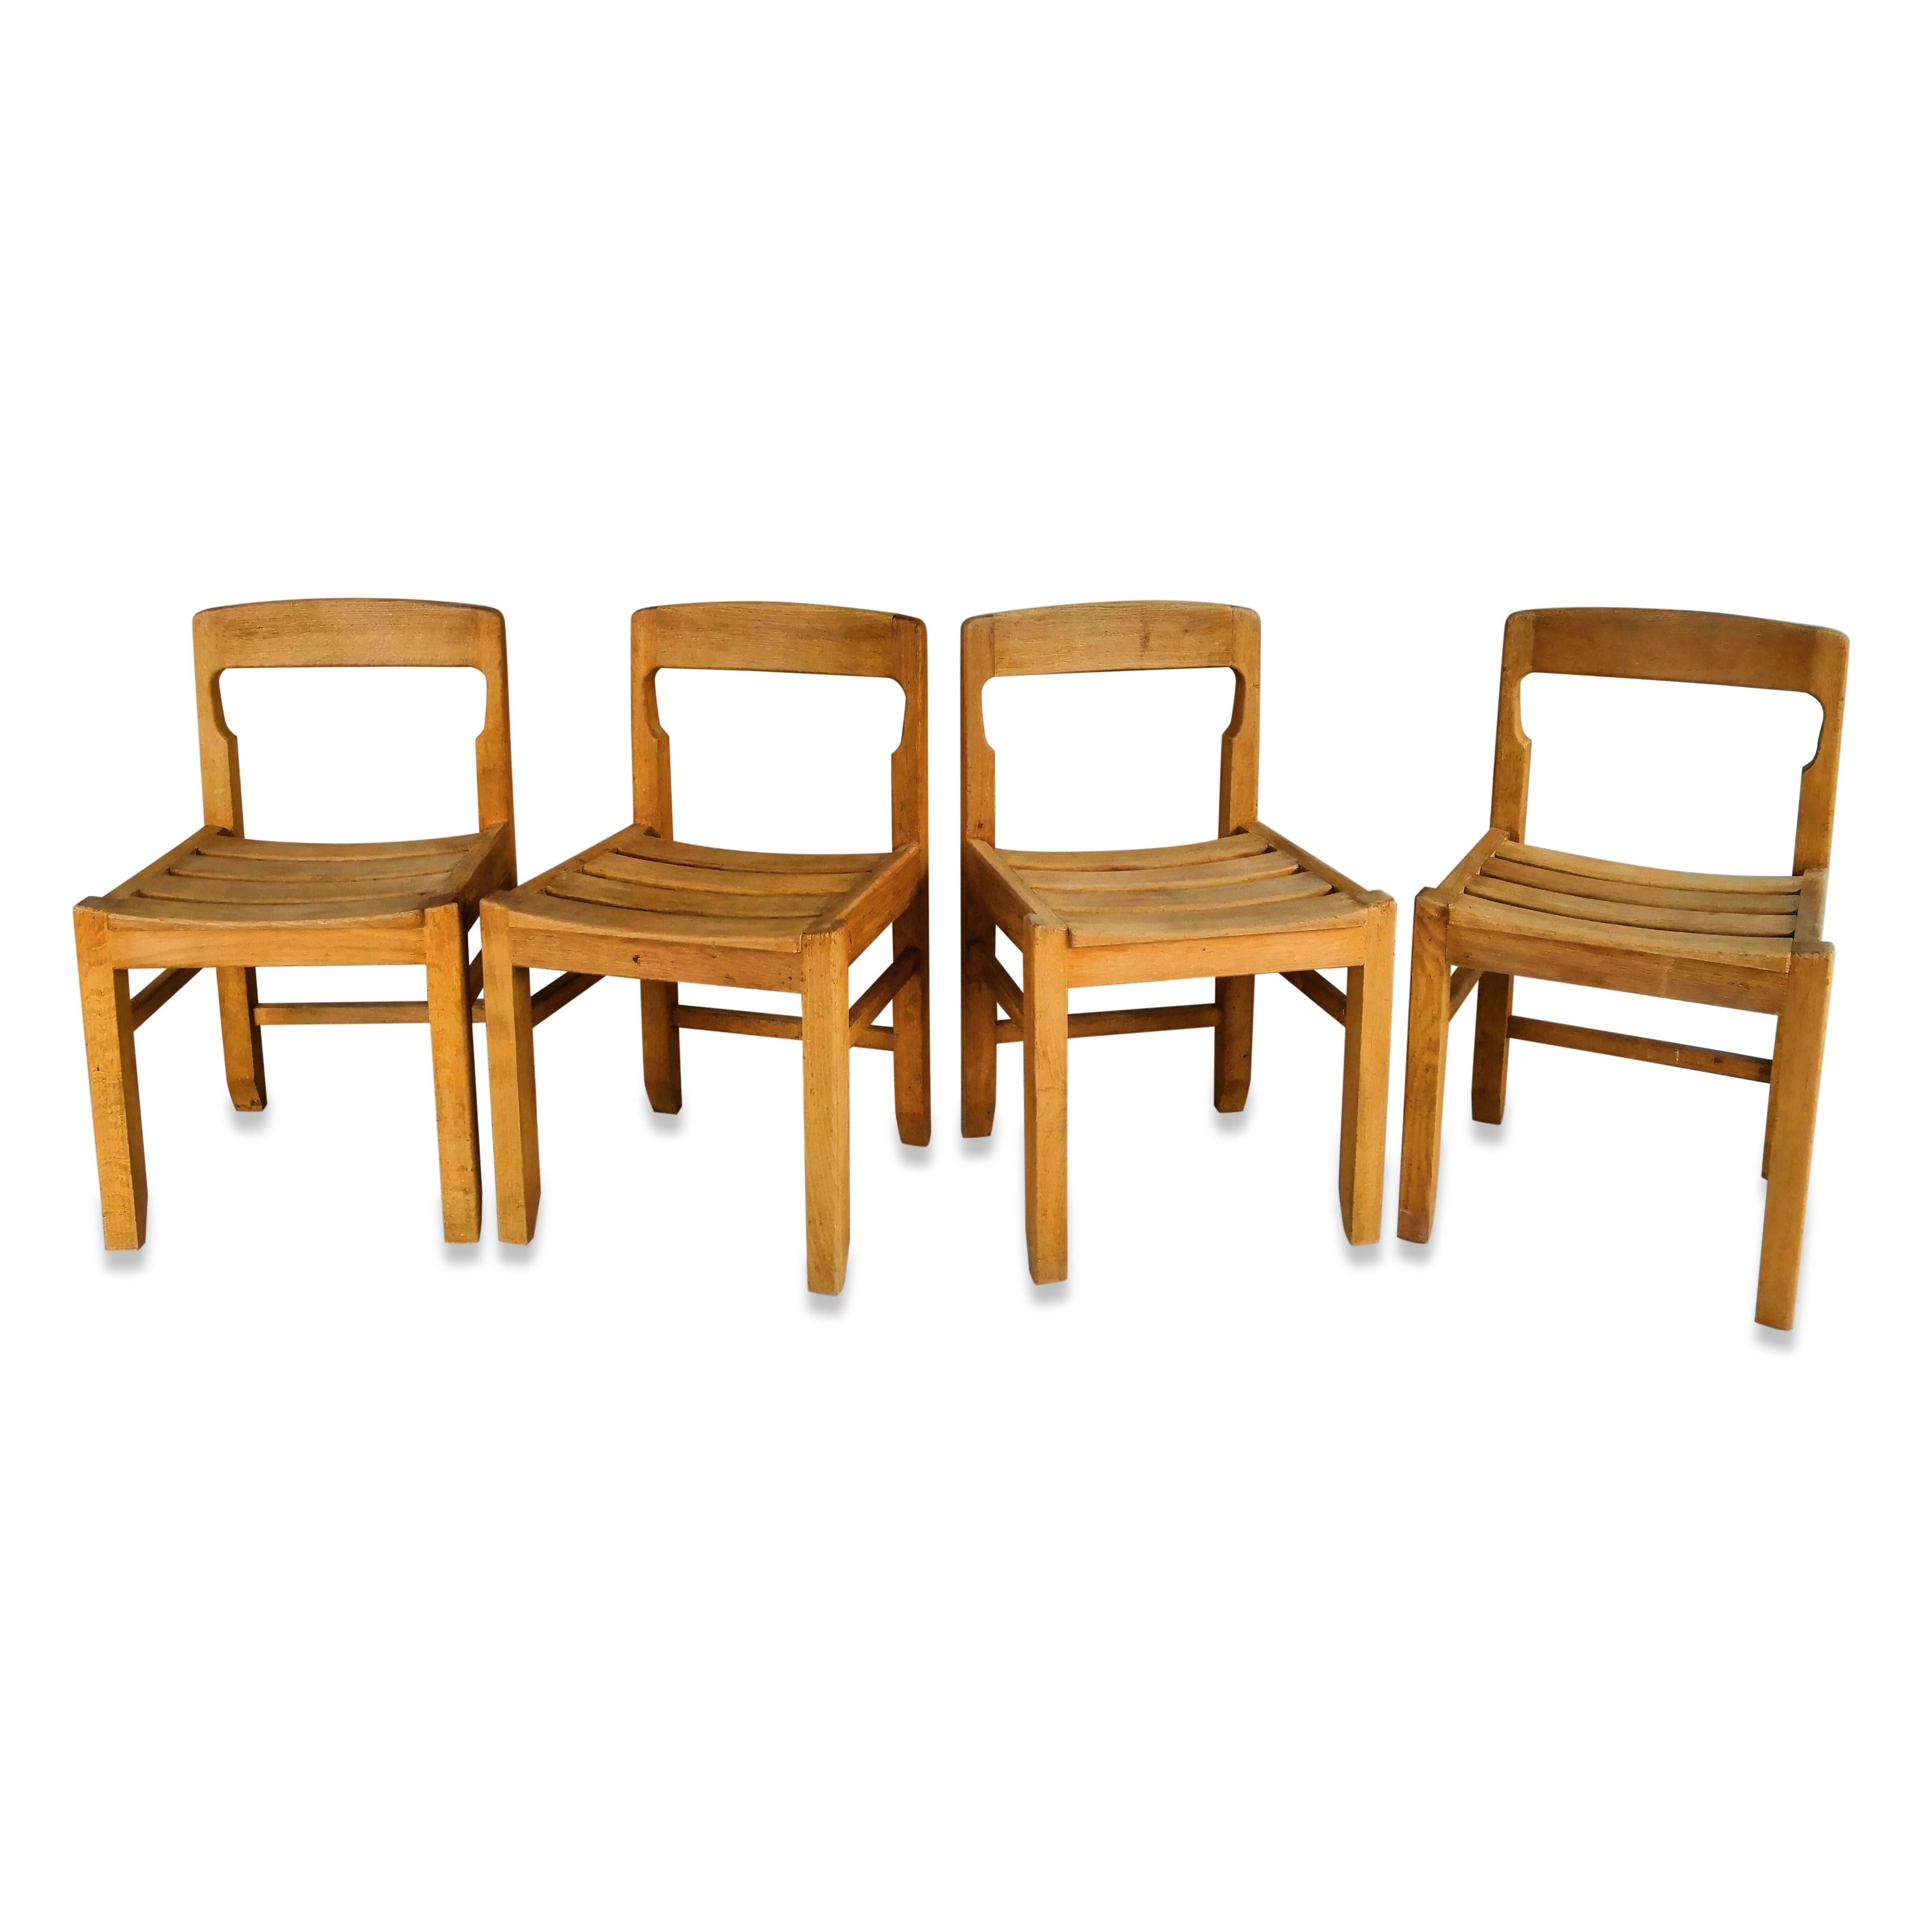 Good vintage condition
These chairs will ship from France 
Price does not include shipping and possible customs related charges
Chairs can be returned to 200 Lexington avenue NYC.